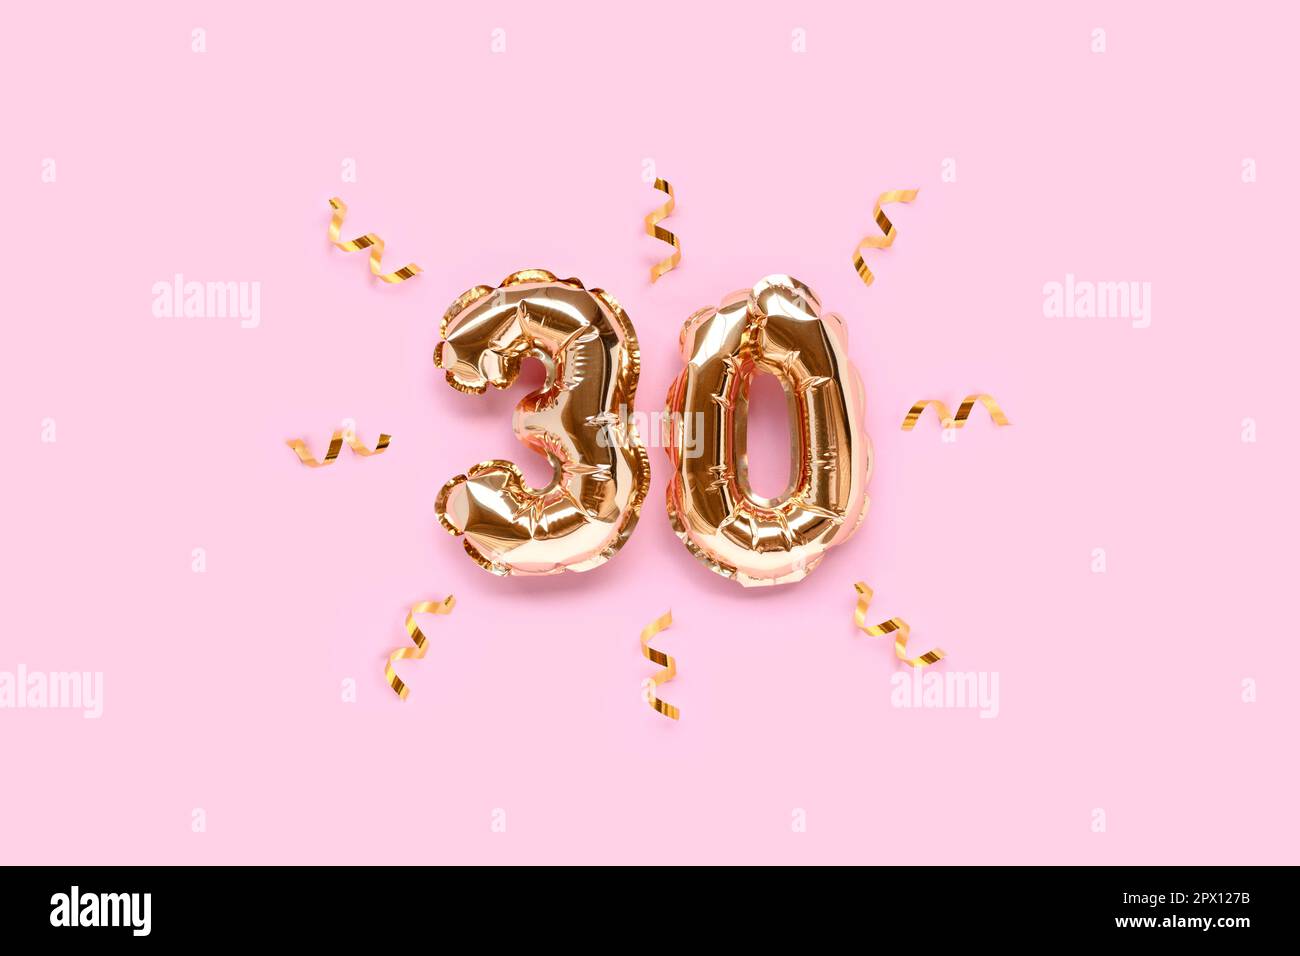 Number 30 gold air balloons with ribbon confetti on a pink background. Stock Photo